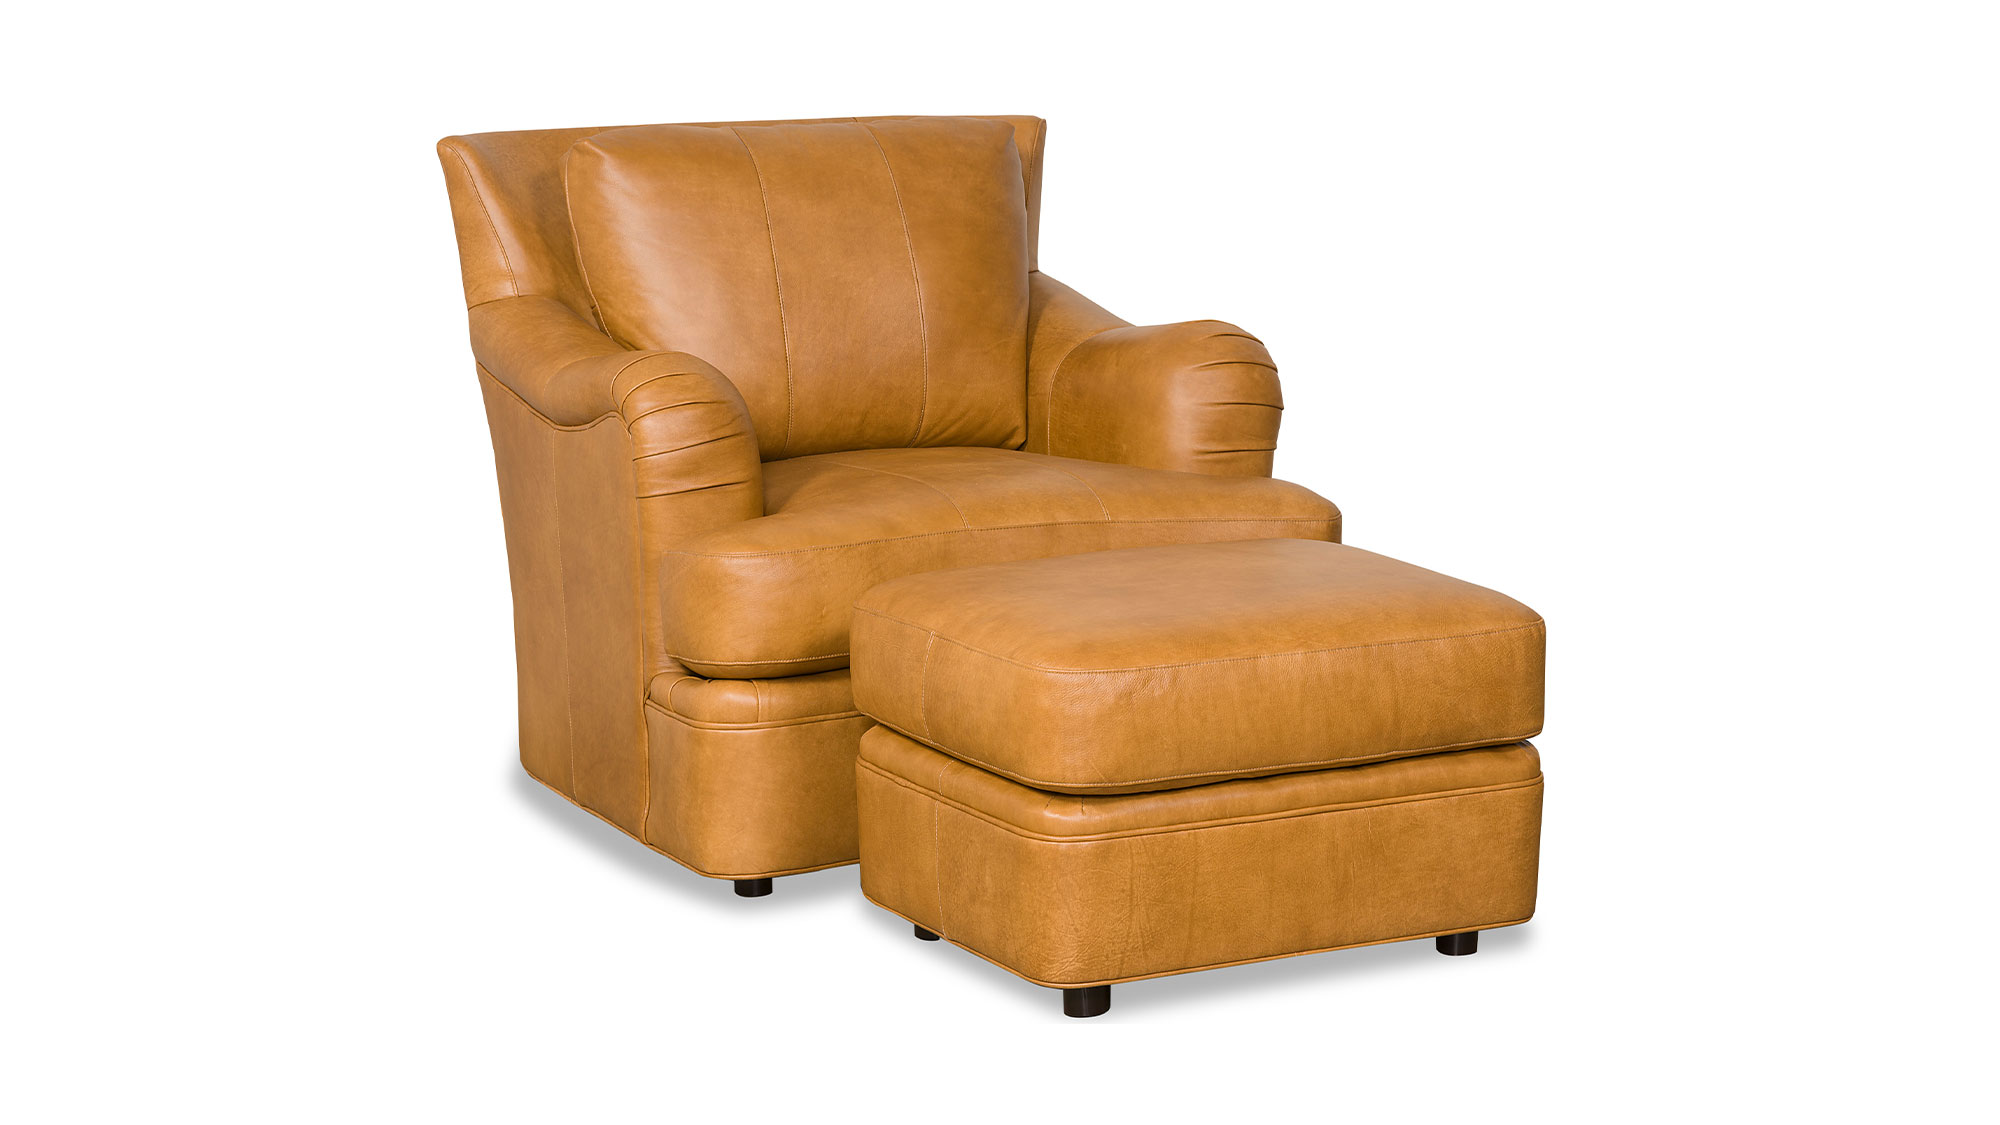 McKinley Leather chair with ottoman